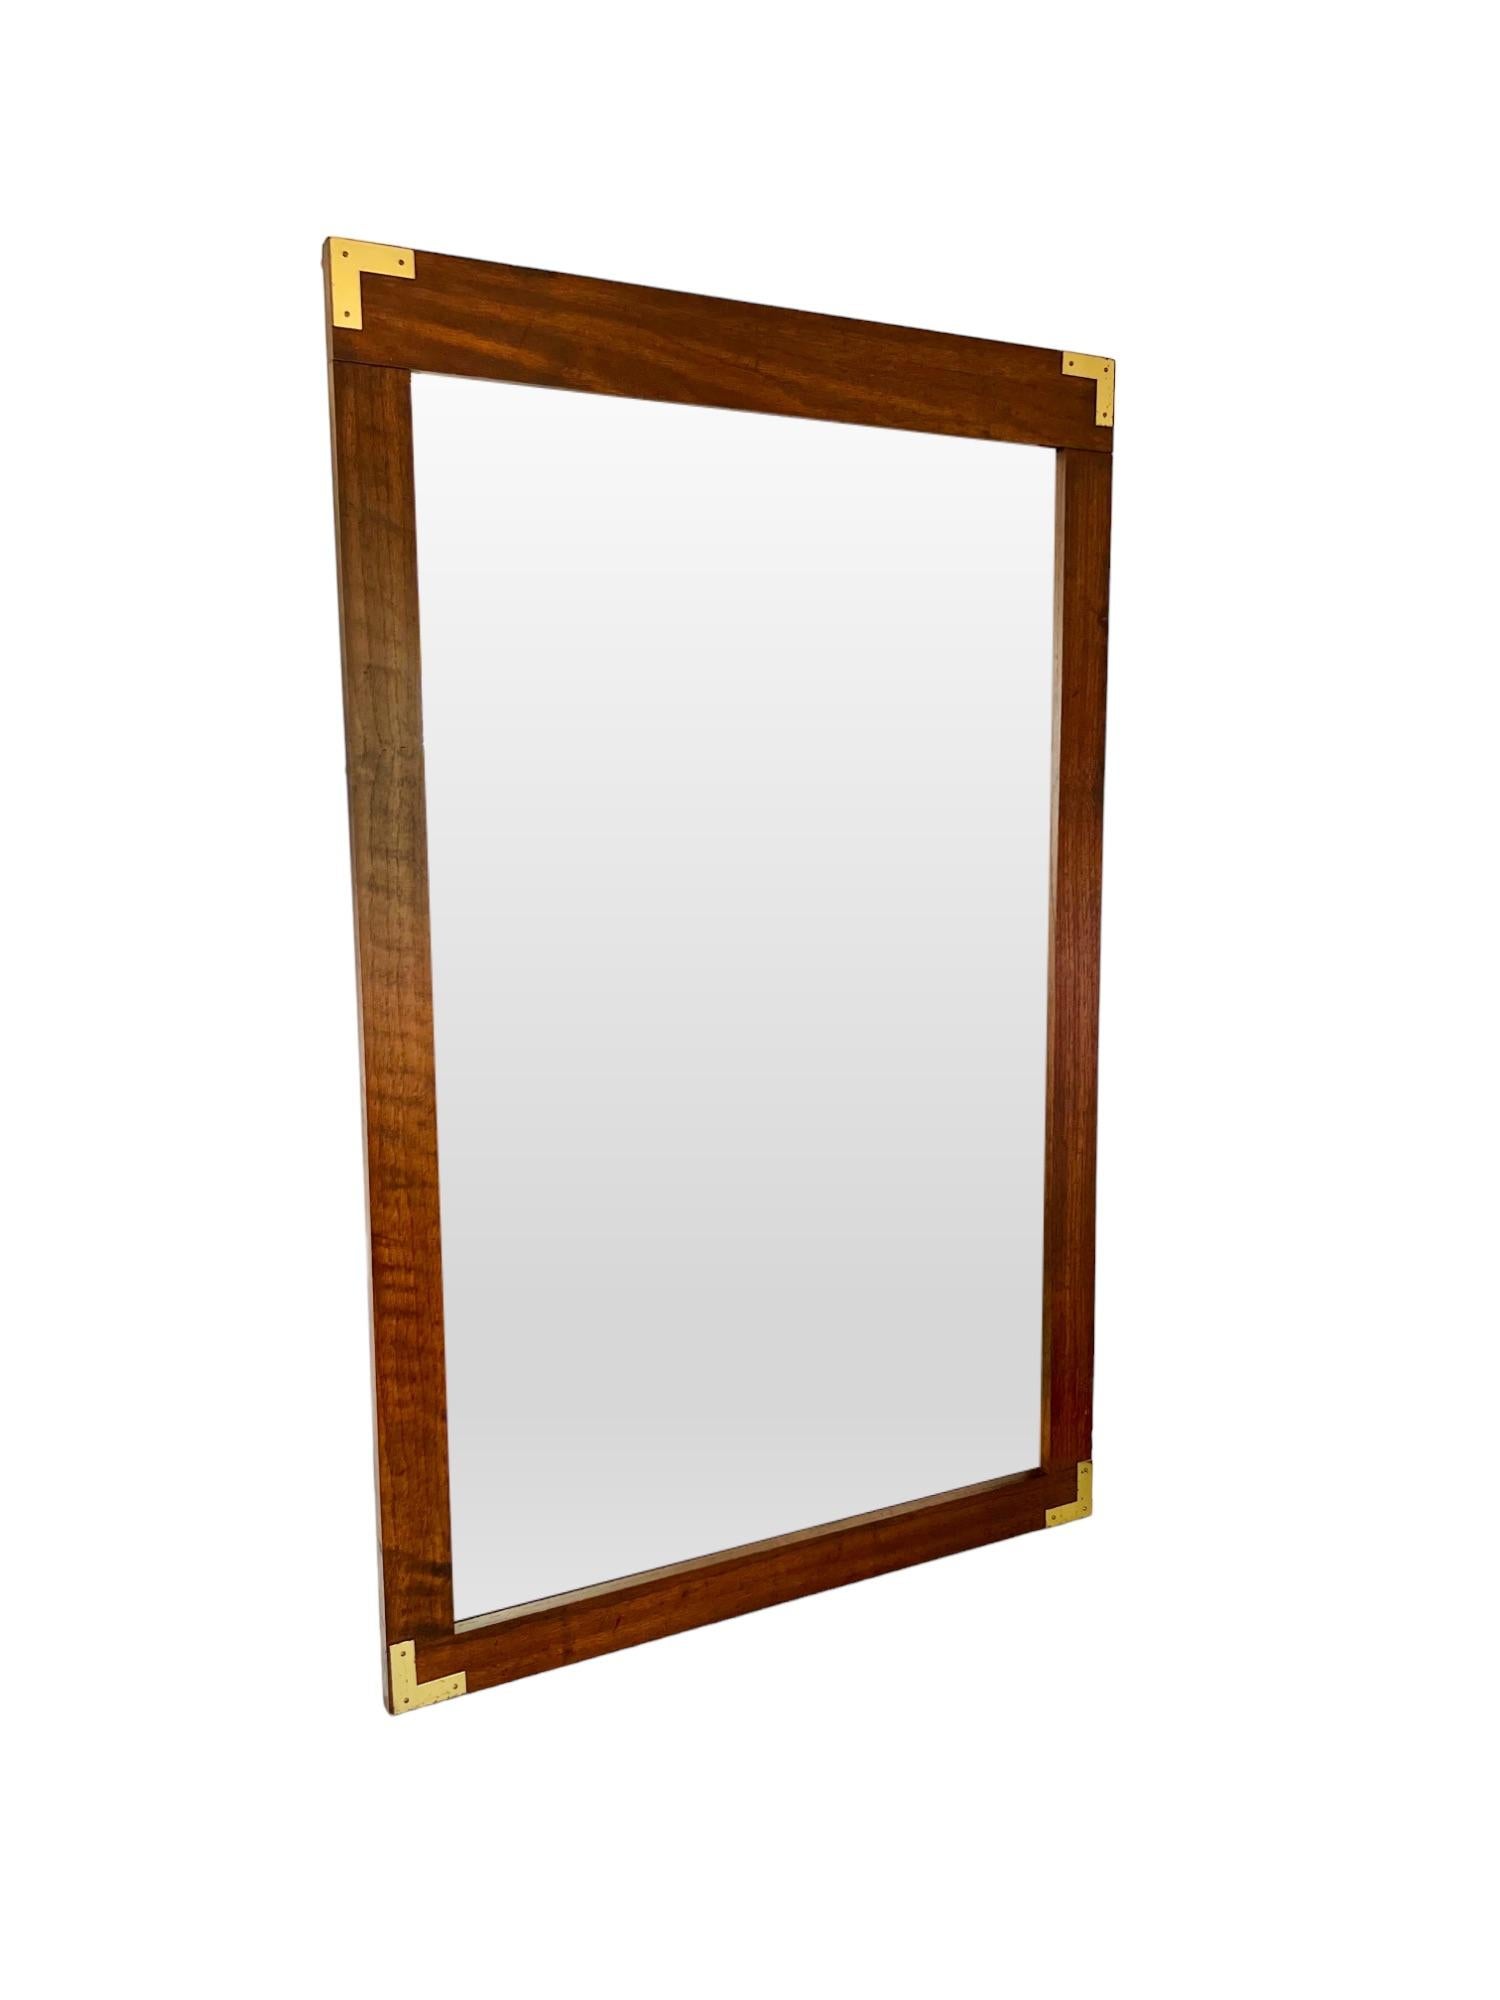 American Vintage Campaign Style Wall Mirror